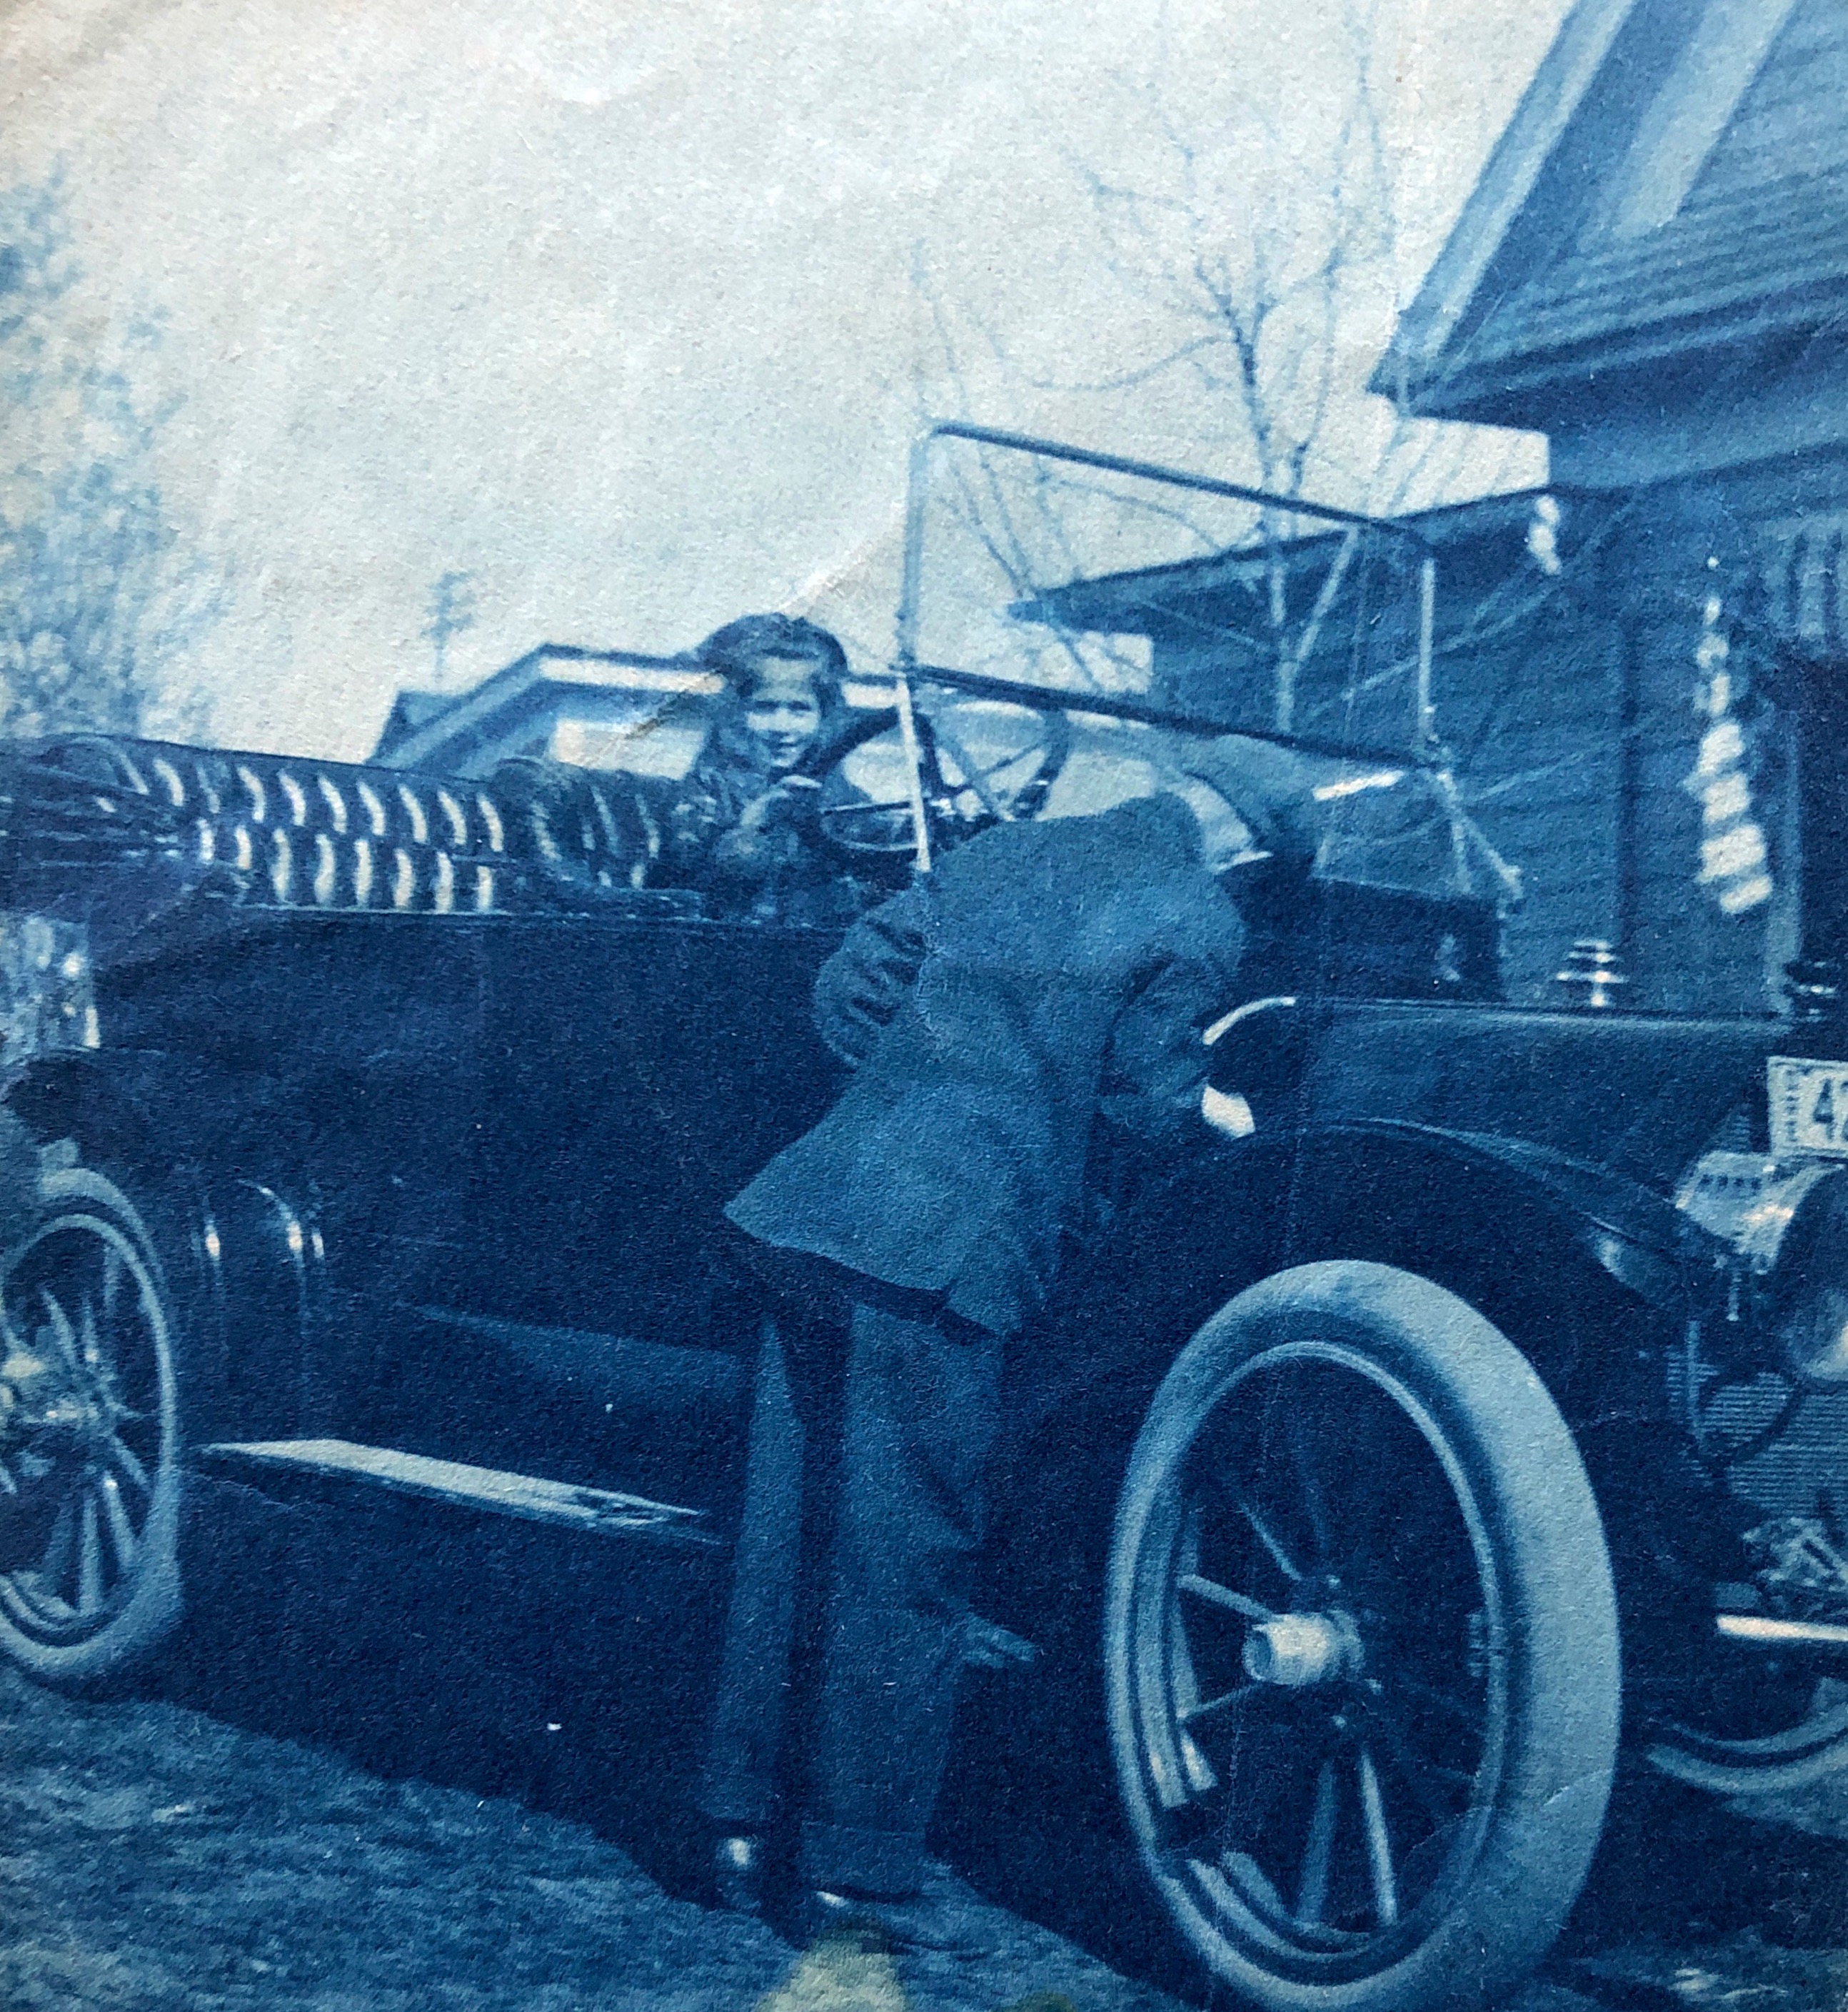 Alberta, hoping to drive. Abt. 1910
Her Dad, Fred, checking the engine. 